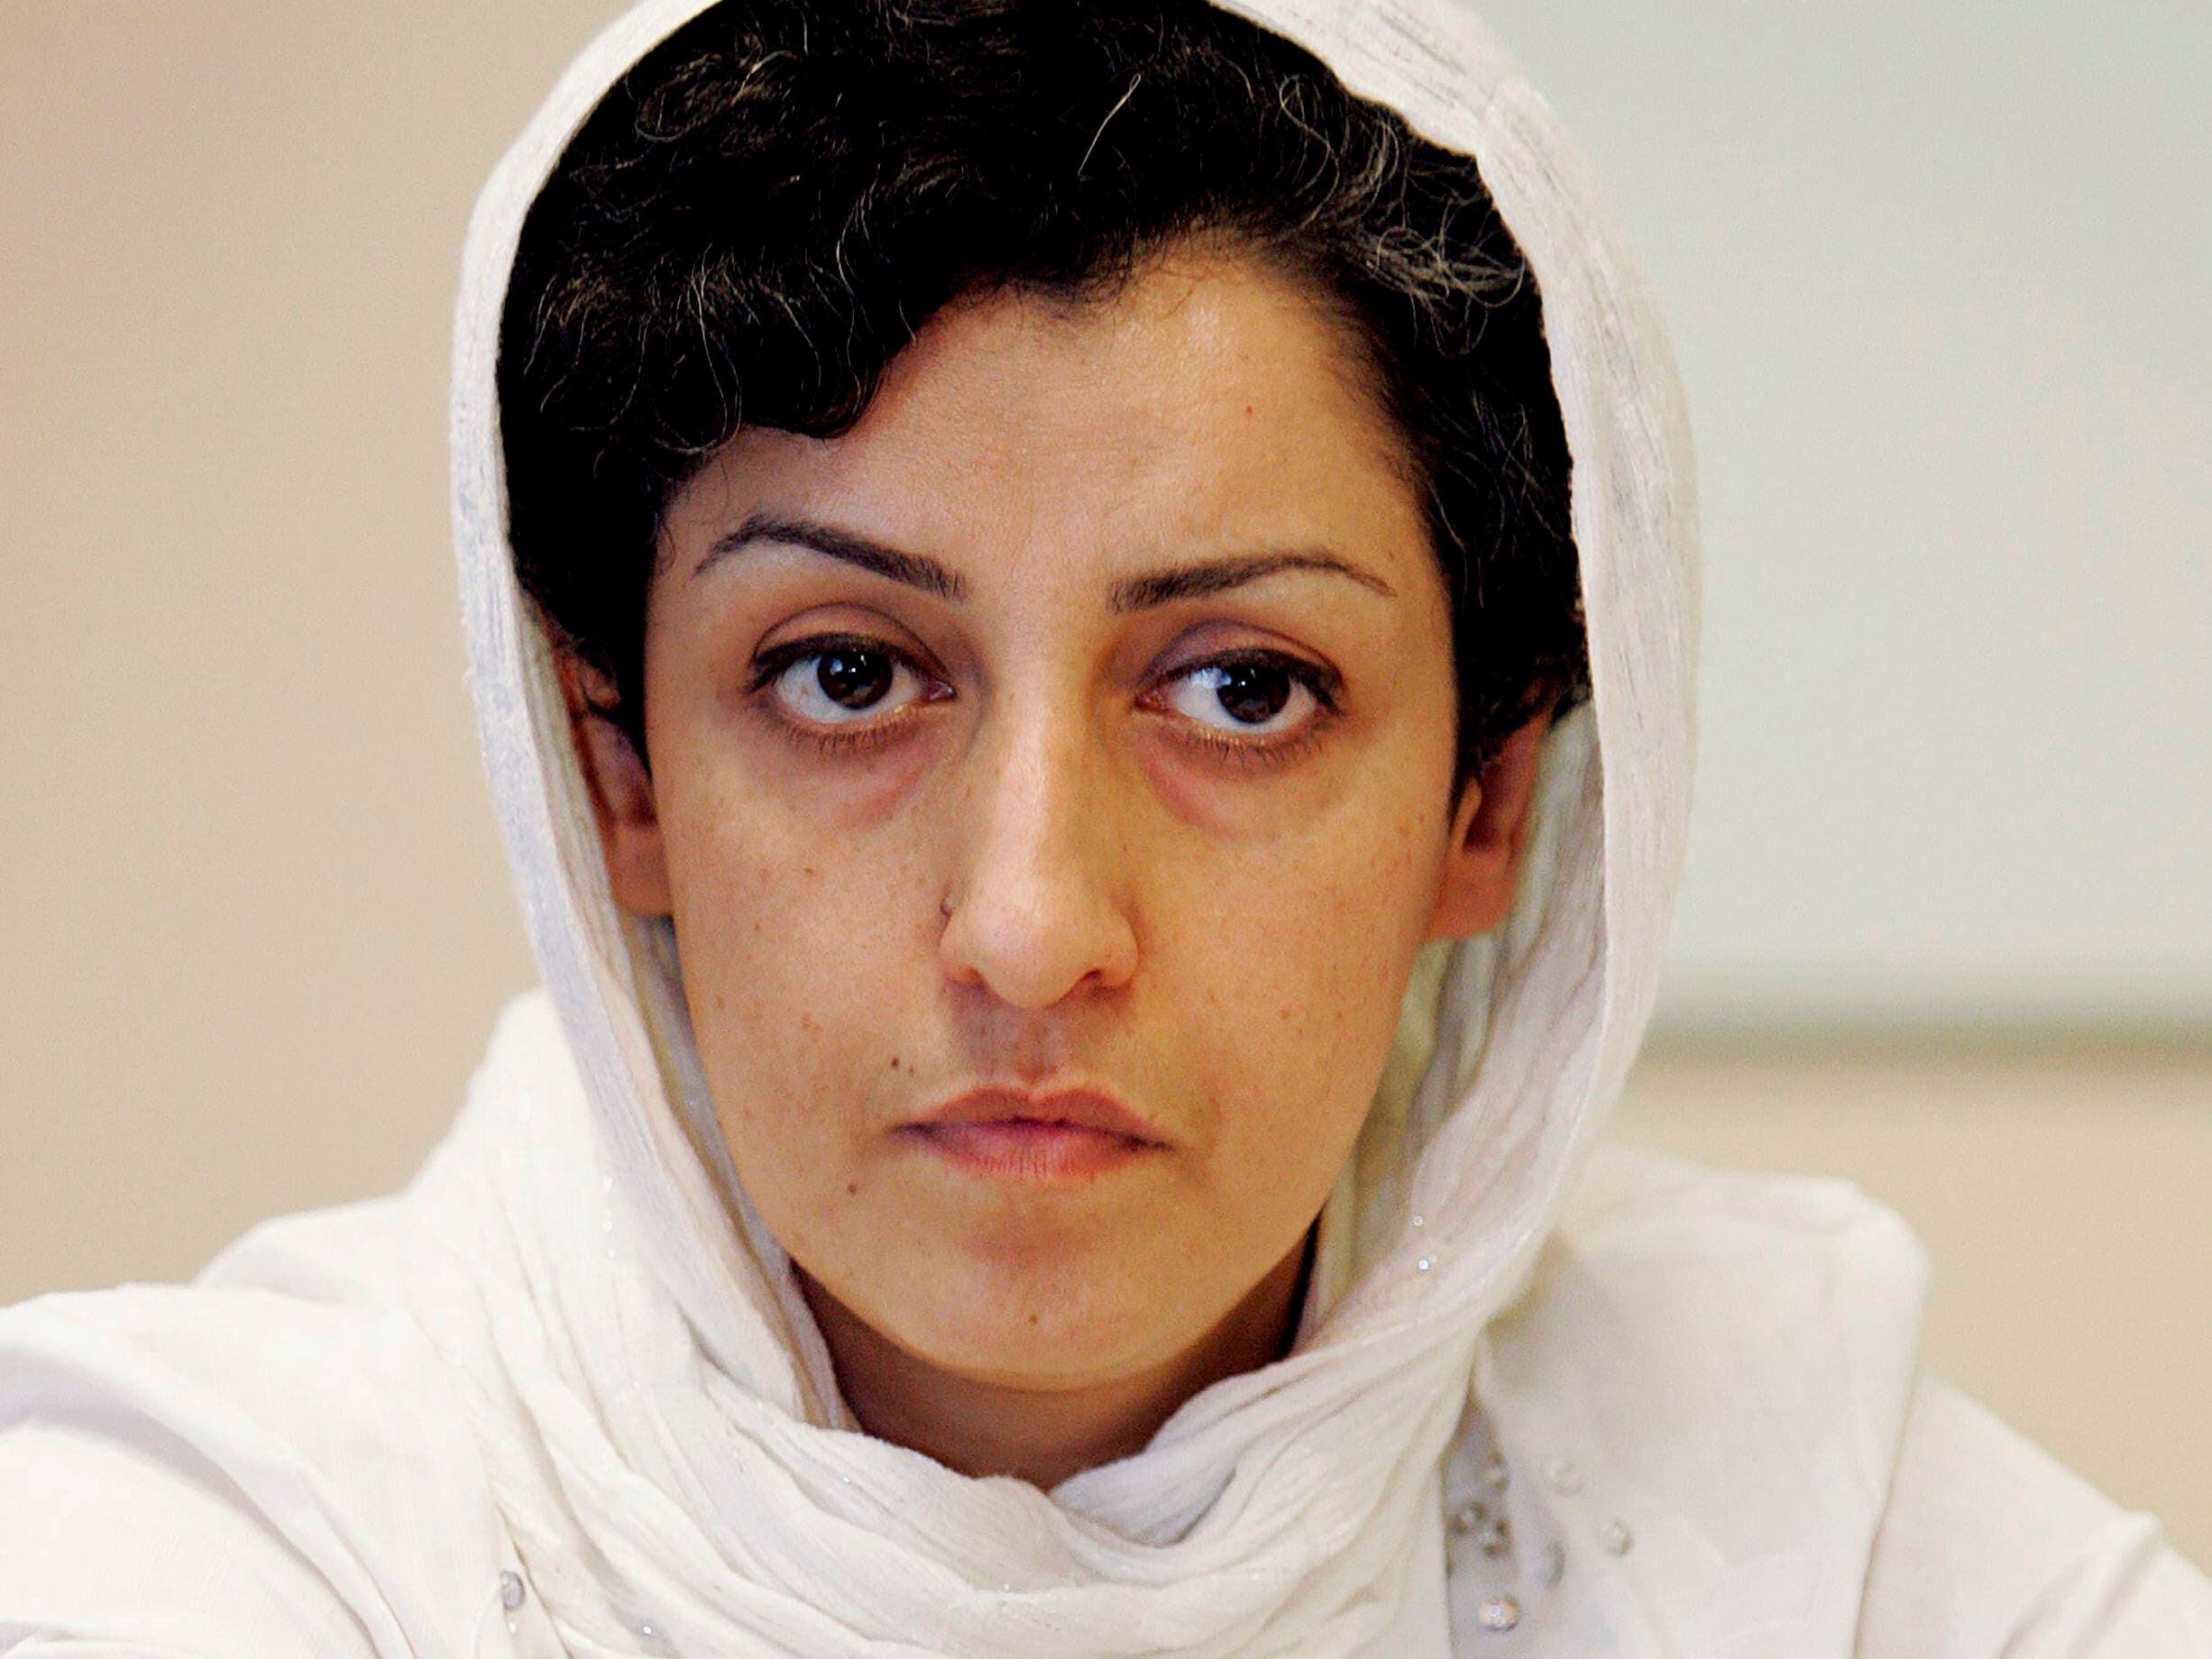 Jailed women’s rights campaigner Narges Mohammadi is awarded Nobel Peace Prize